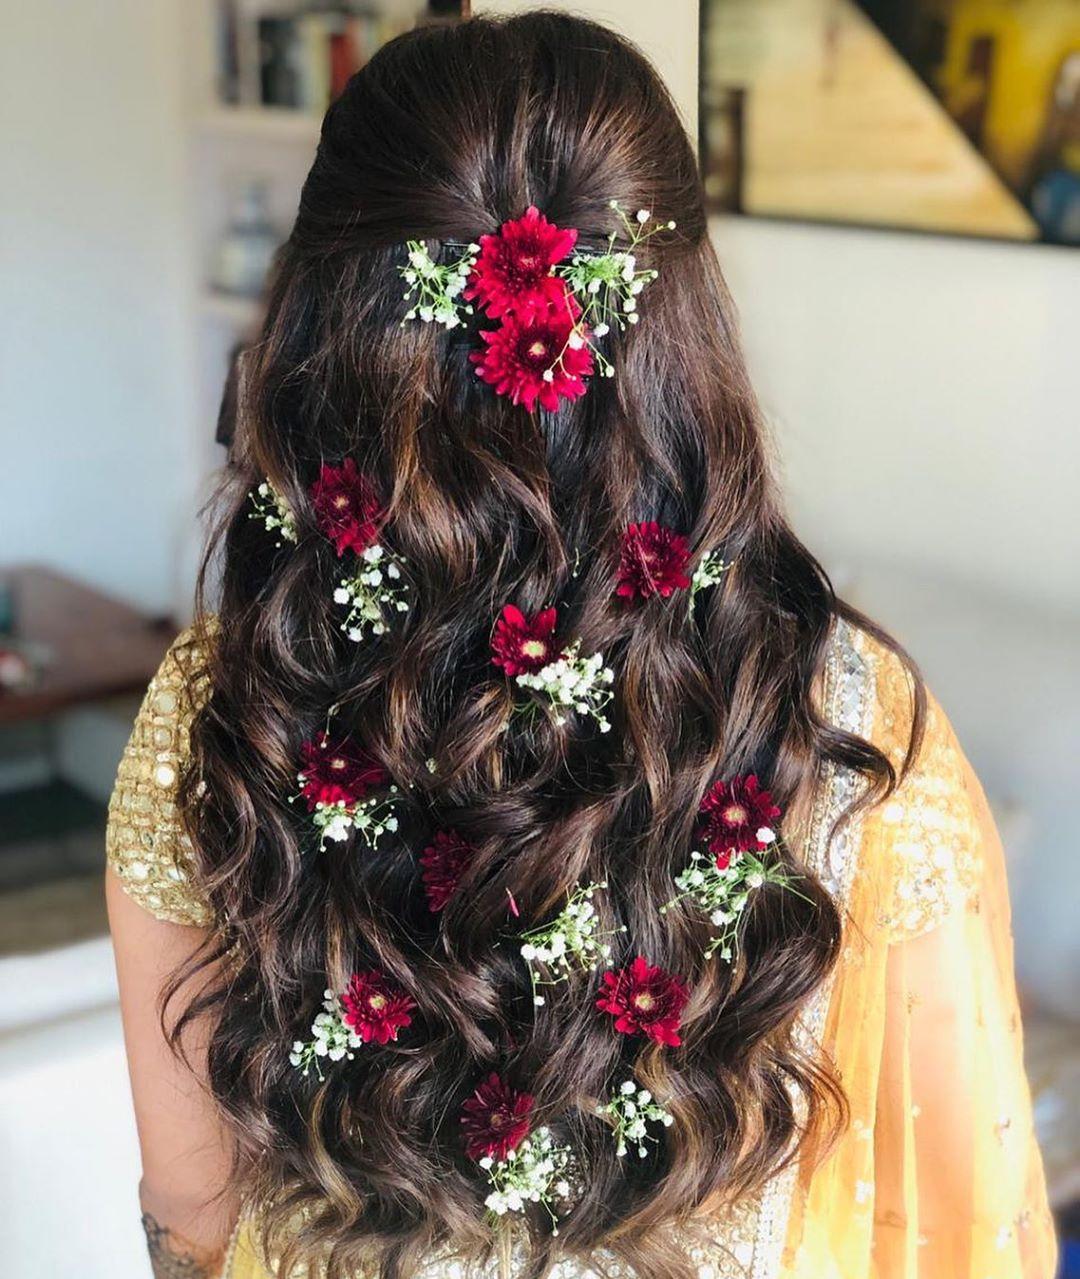 Elegant Bridal Hairstyles With Butterfly Accessories. | Weddingplz | Long  hair styles, Traditional hairstyle, Bridal hair buns